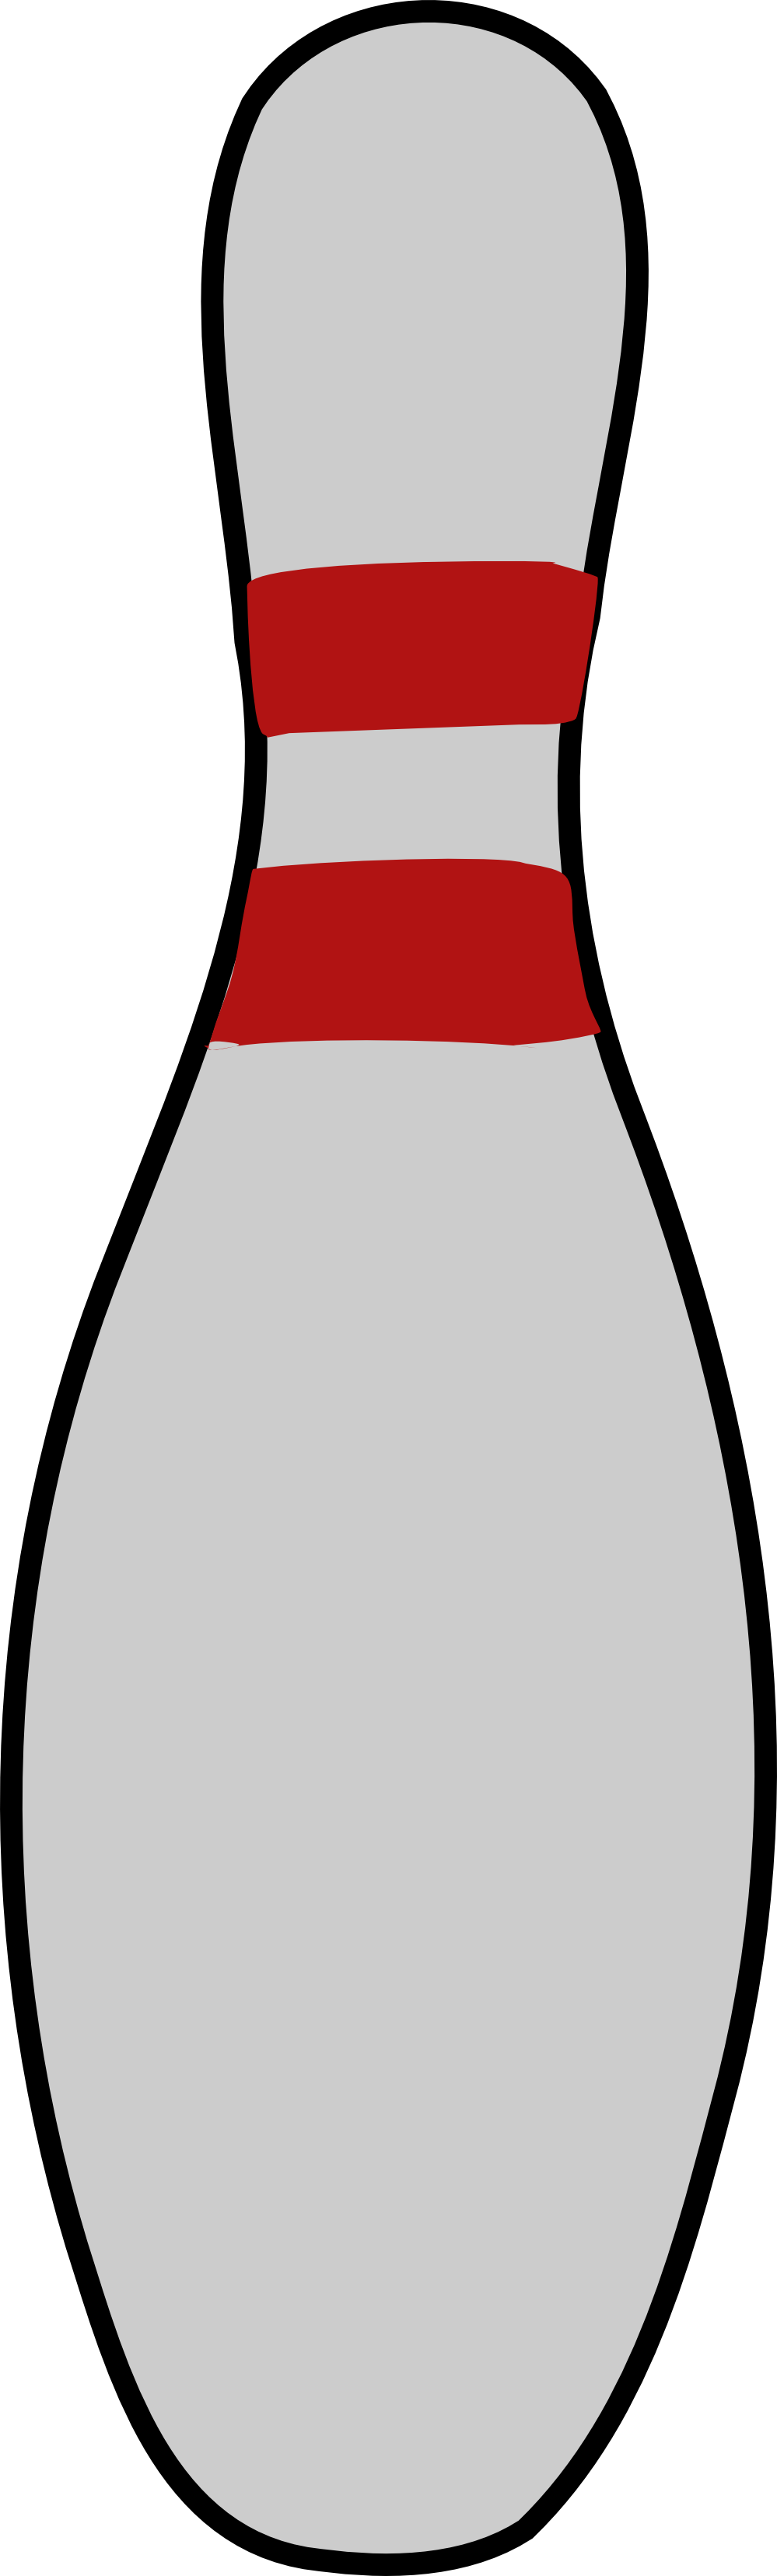 Bowling Pins Picture - Clipart library